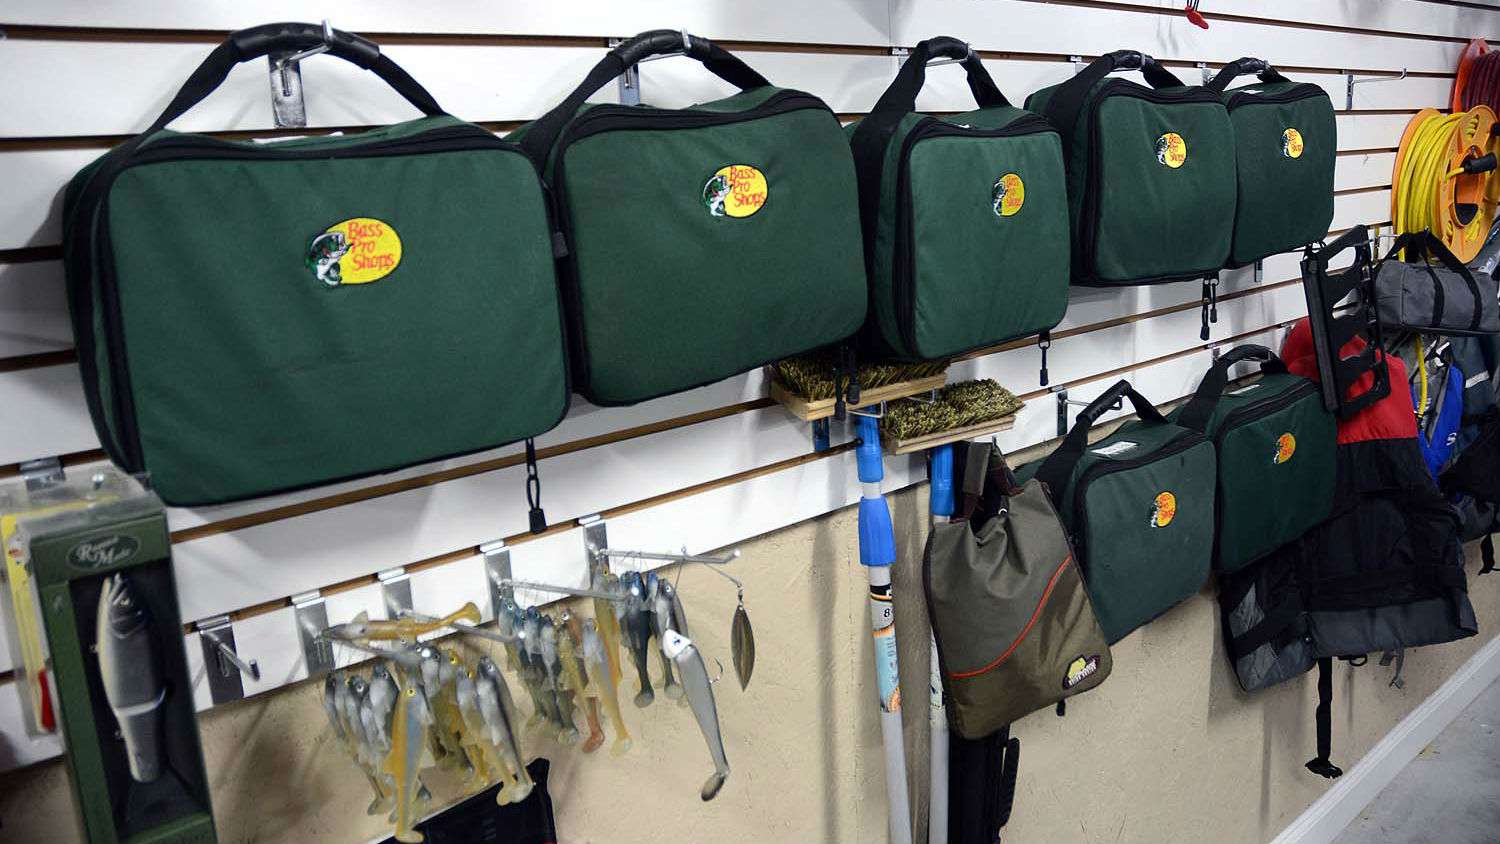 The shiny, clean surface indeed looks good and makes items lining the wall stand out. What is inside these Bass Pro Shops soft-sided storage bags is the serious eye candy to any serious Man Cave dweller. 